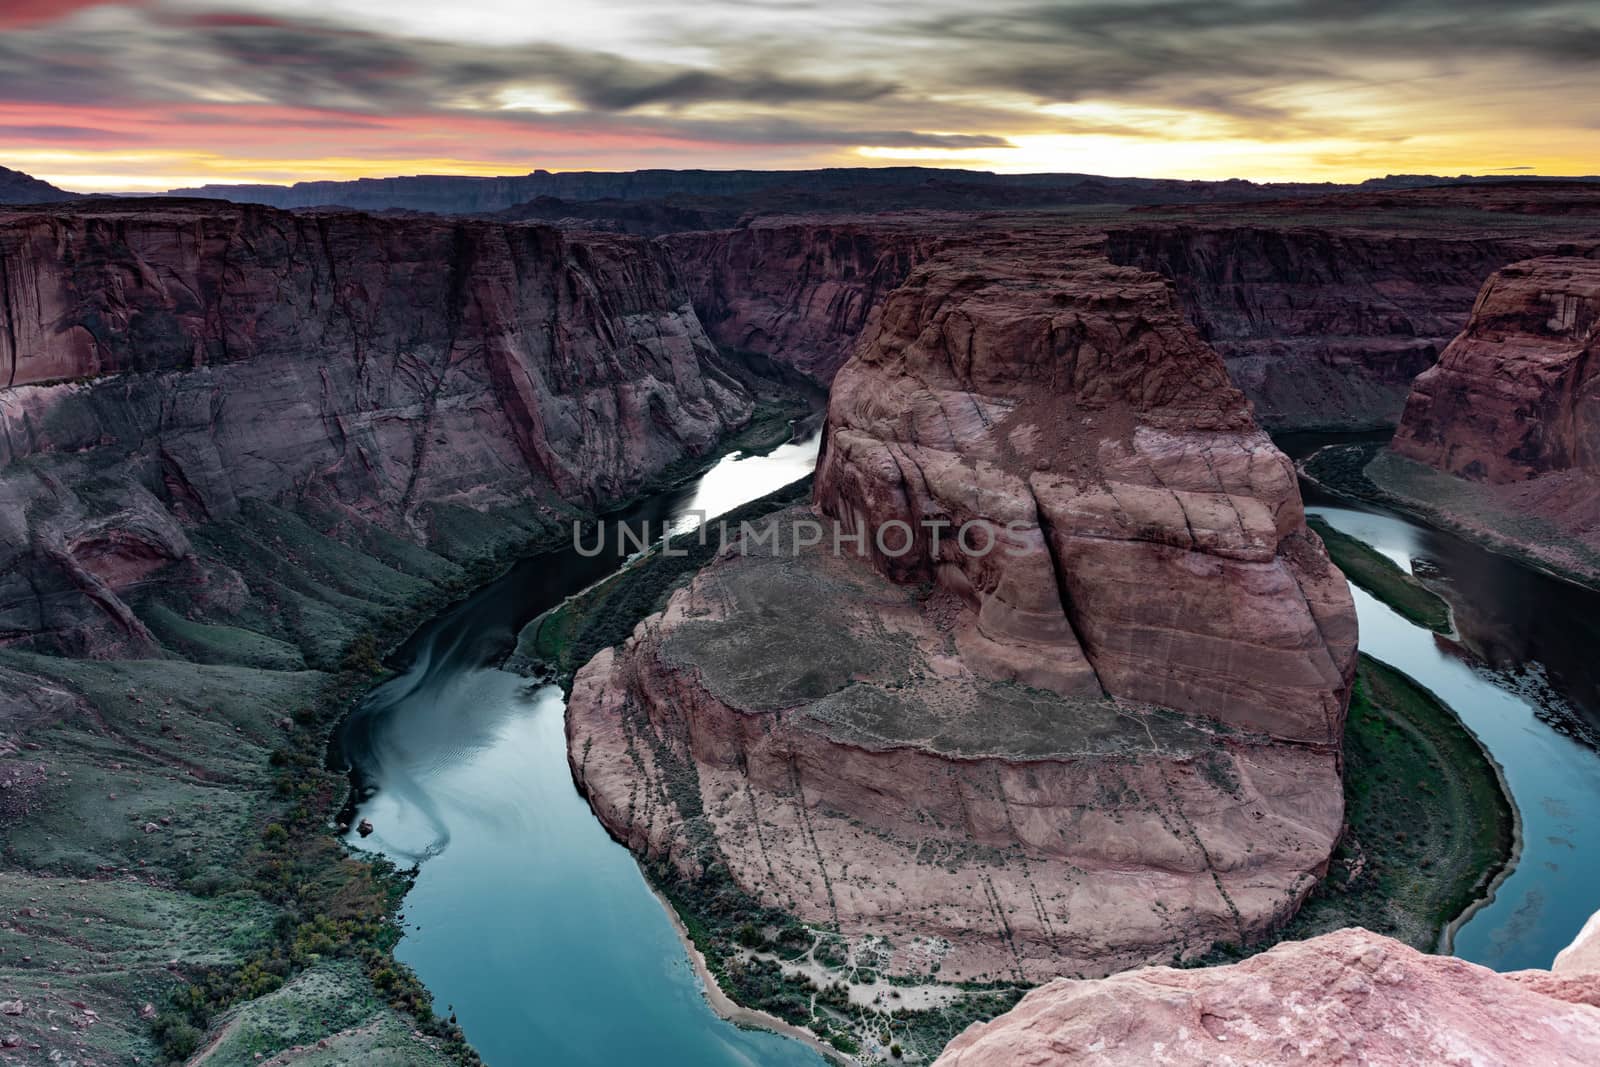 A wondeful view of Colorado river at sunset. The Horseshoe Bend dominating the panorama